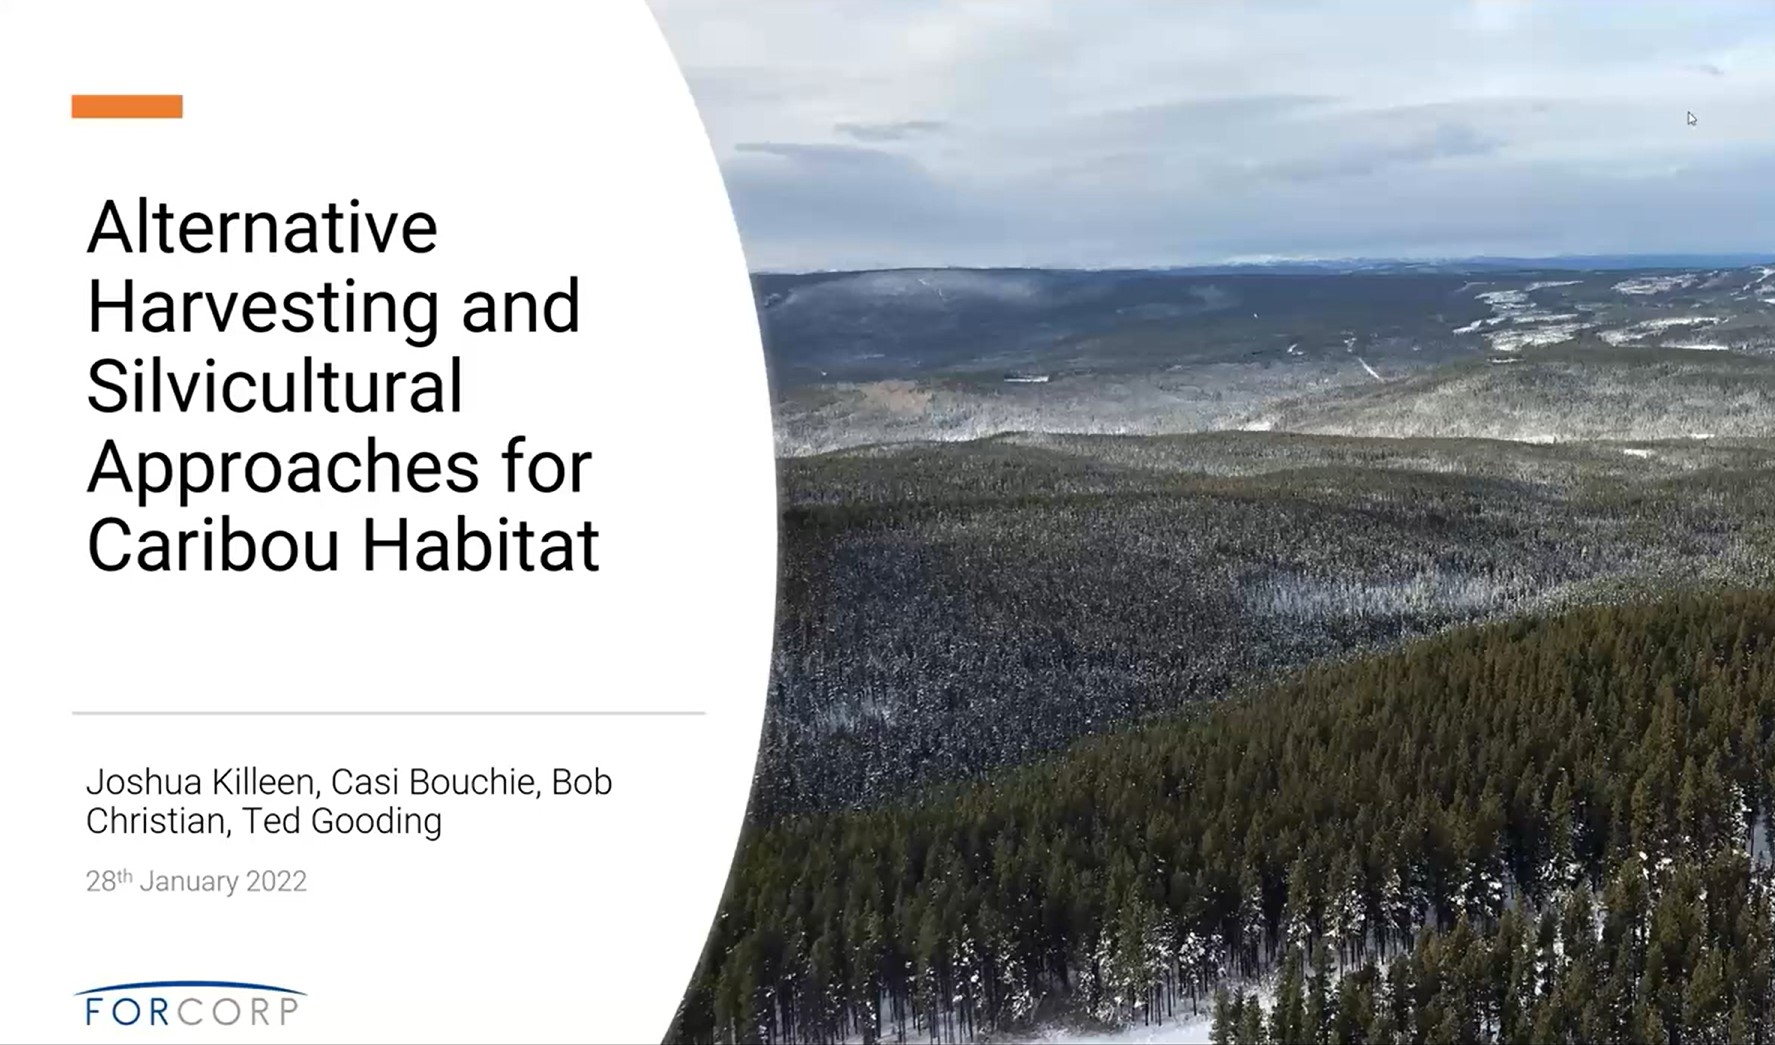 Alternate harvesting and silviculture approaches for promoting caribou habitat | Webinar #2